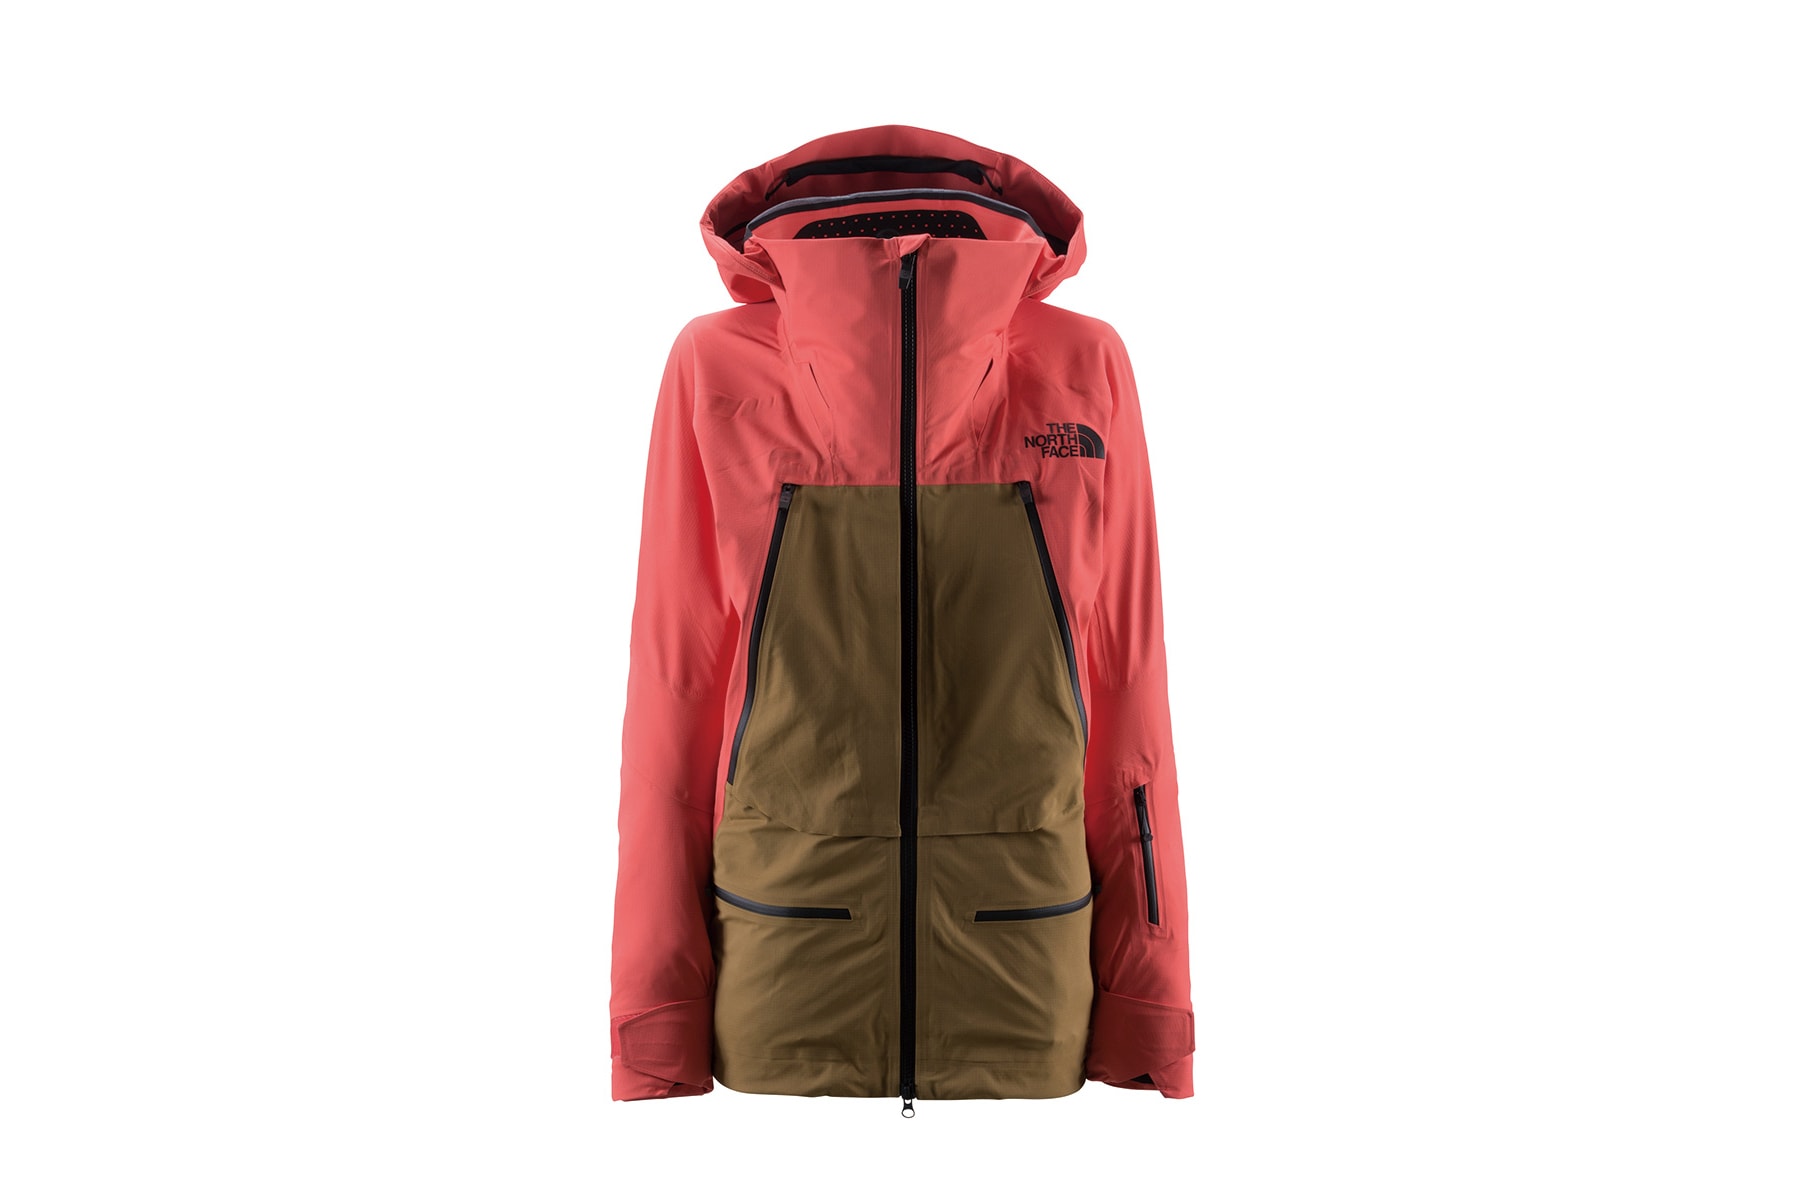 The north face ザ・ノースフェイス drops new latest 防水透湿 新素材 outwear capsule futurelight technical material textile technology outdoor  新作 アウター ジャケット ランニング 登山 スキー 冬